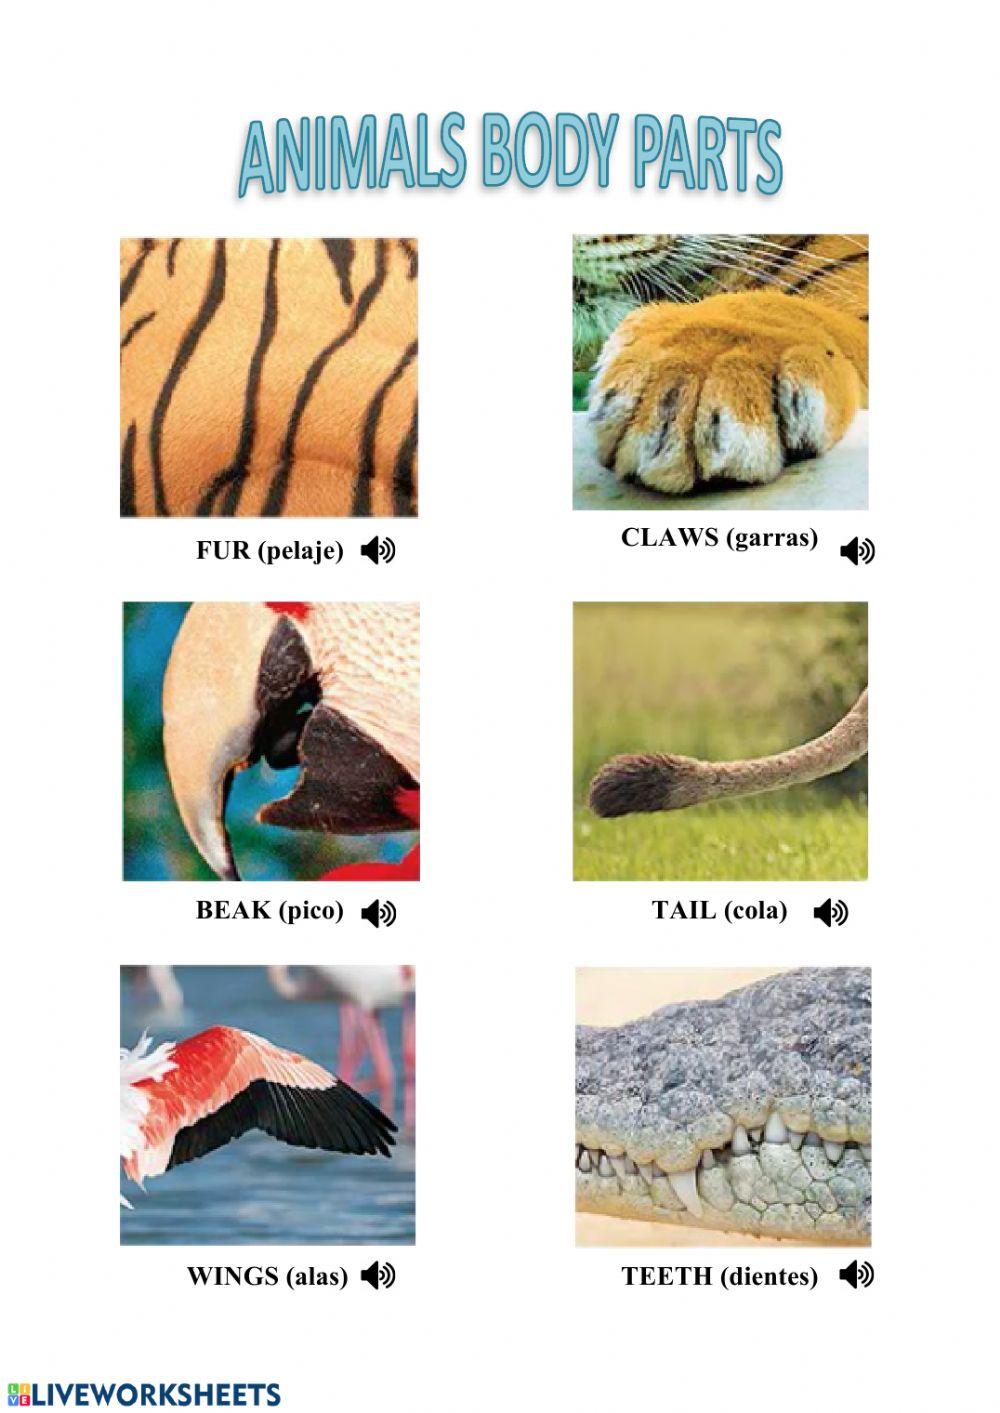 Vocabulary parts of the body (animals)